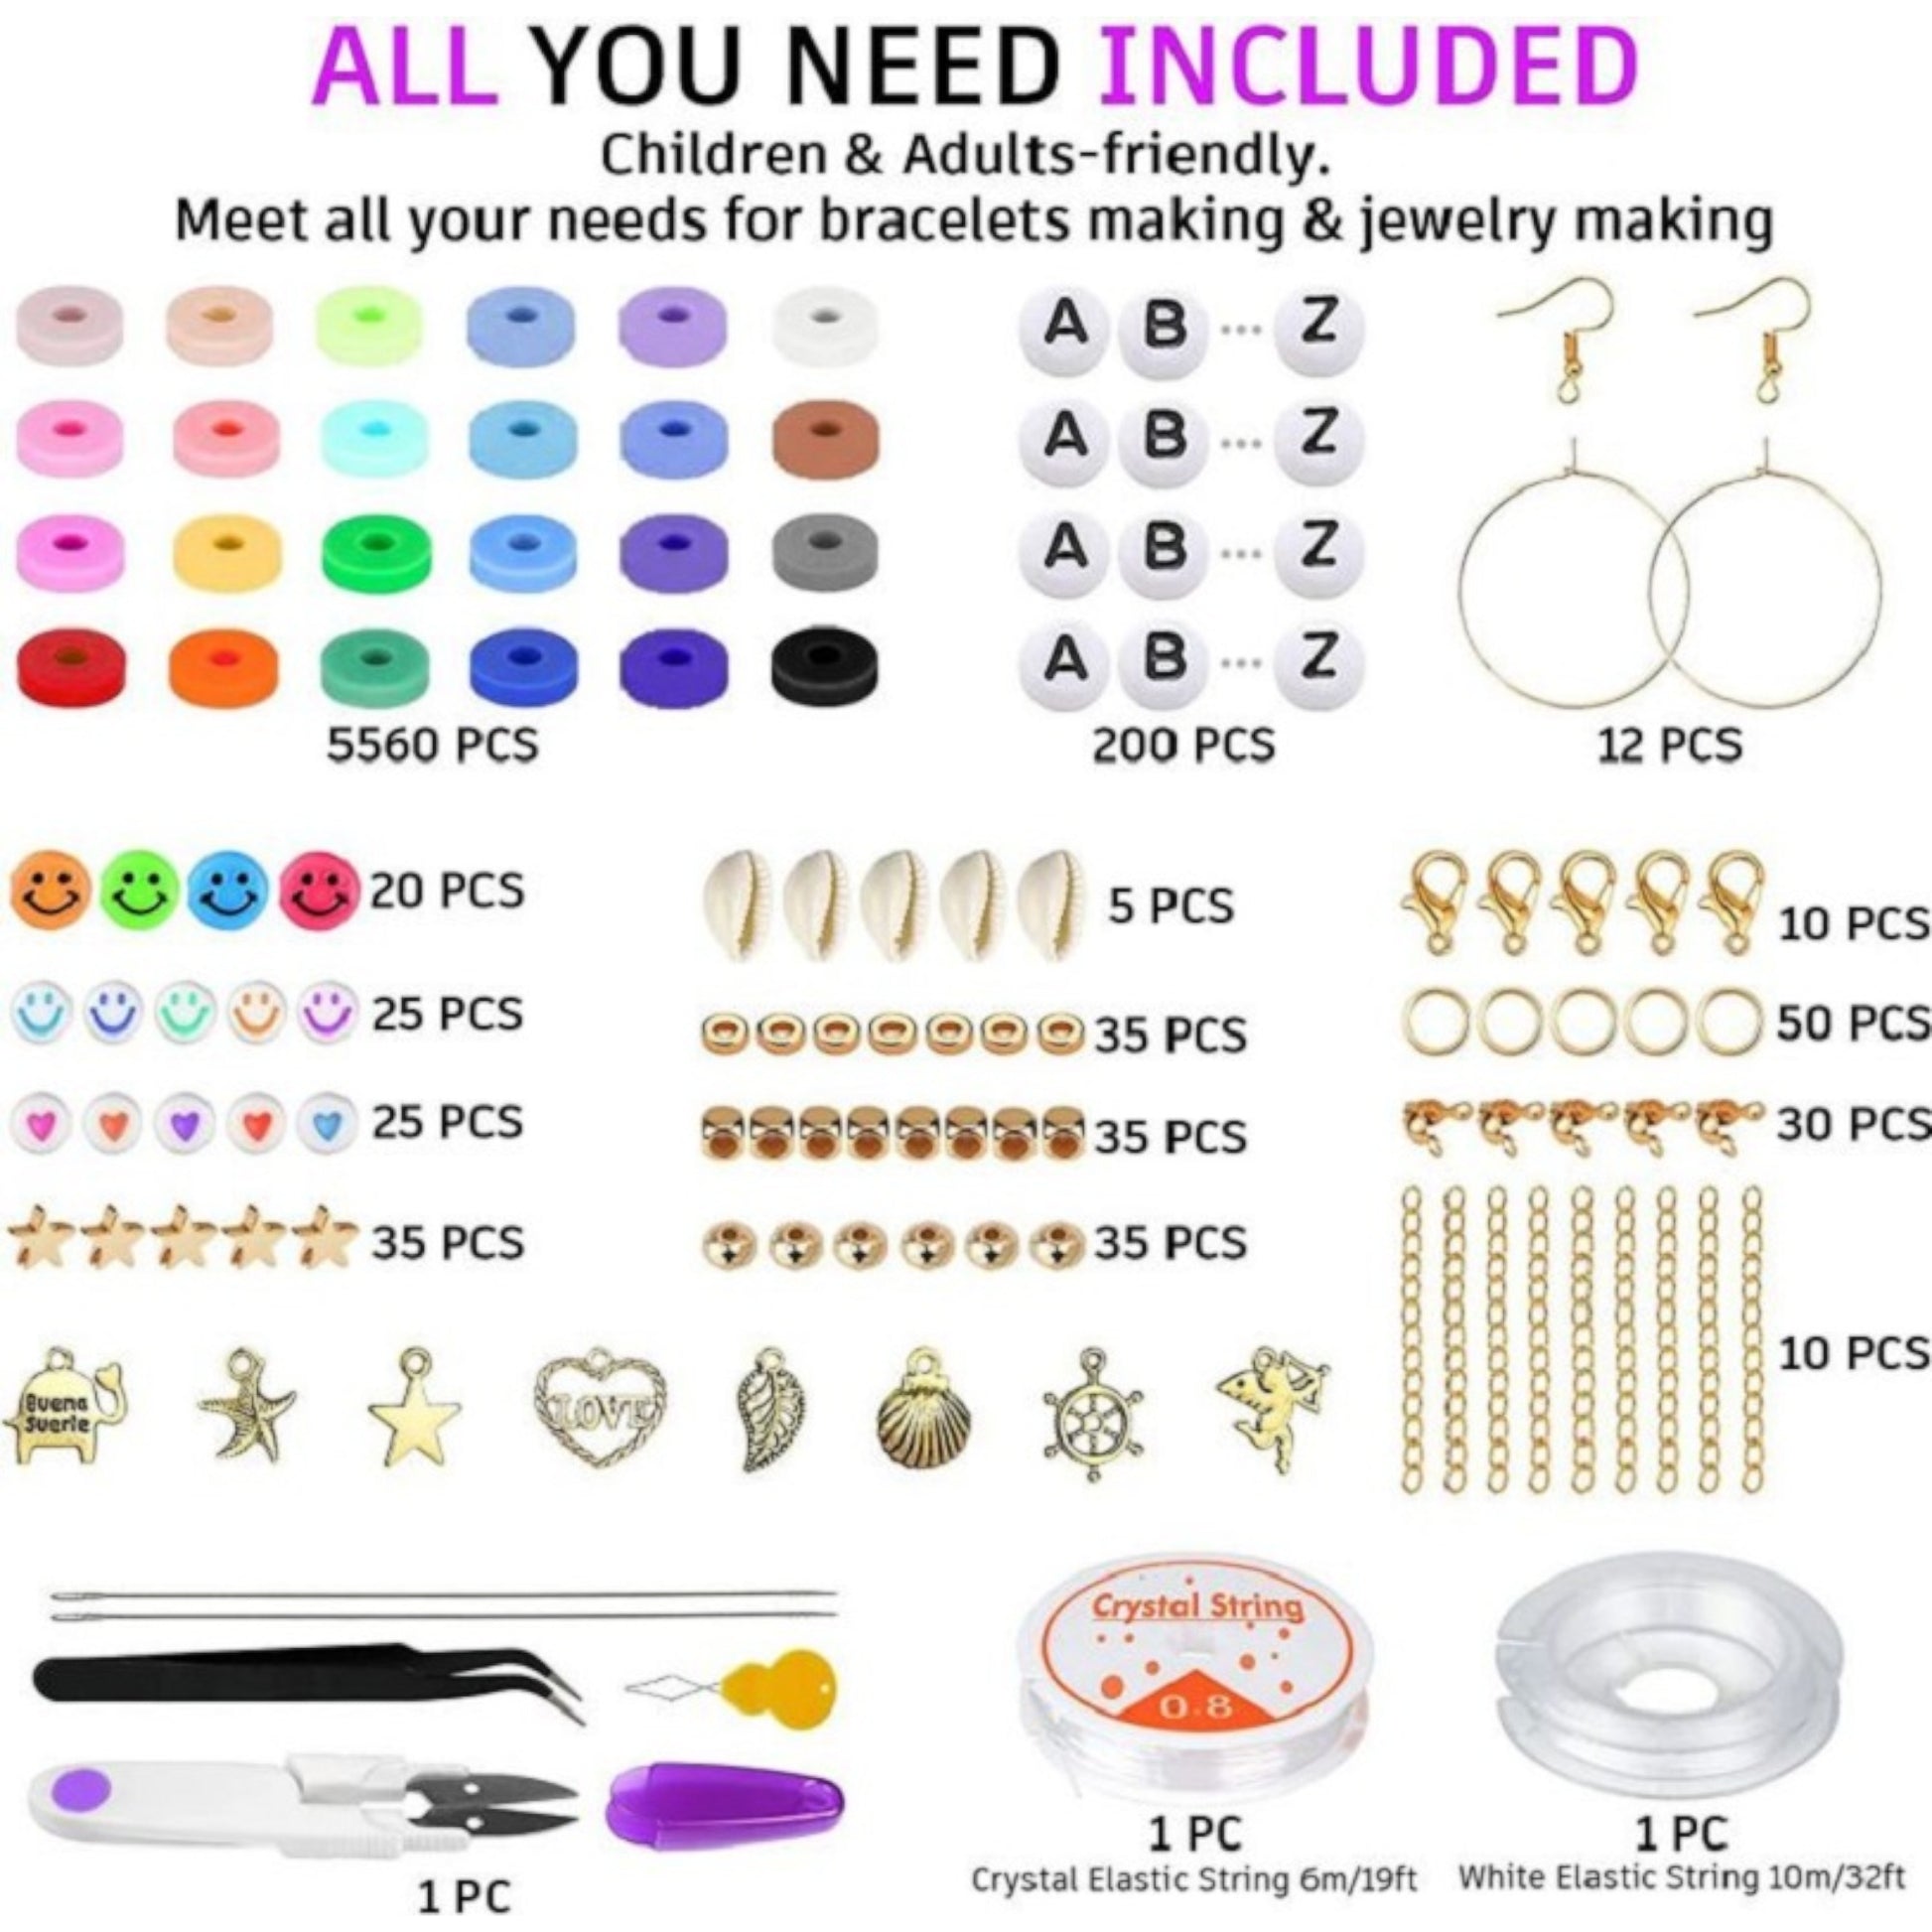 DIY Beading kits for making bracelets and other jewelry. – VadymShop